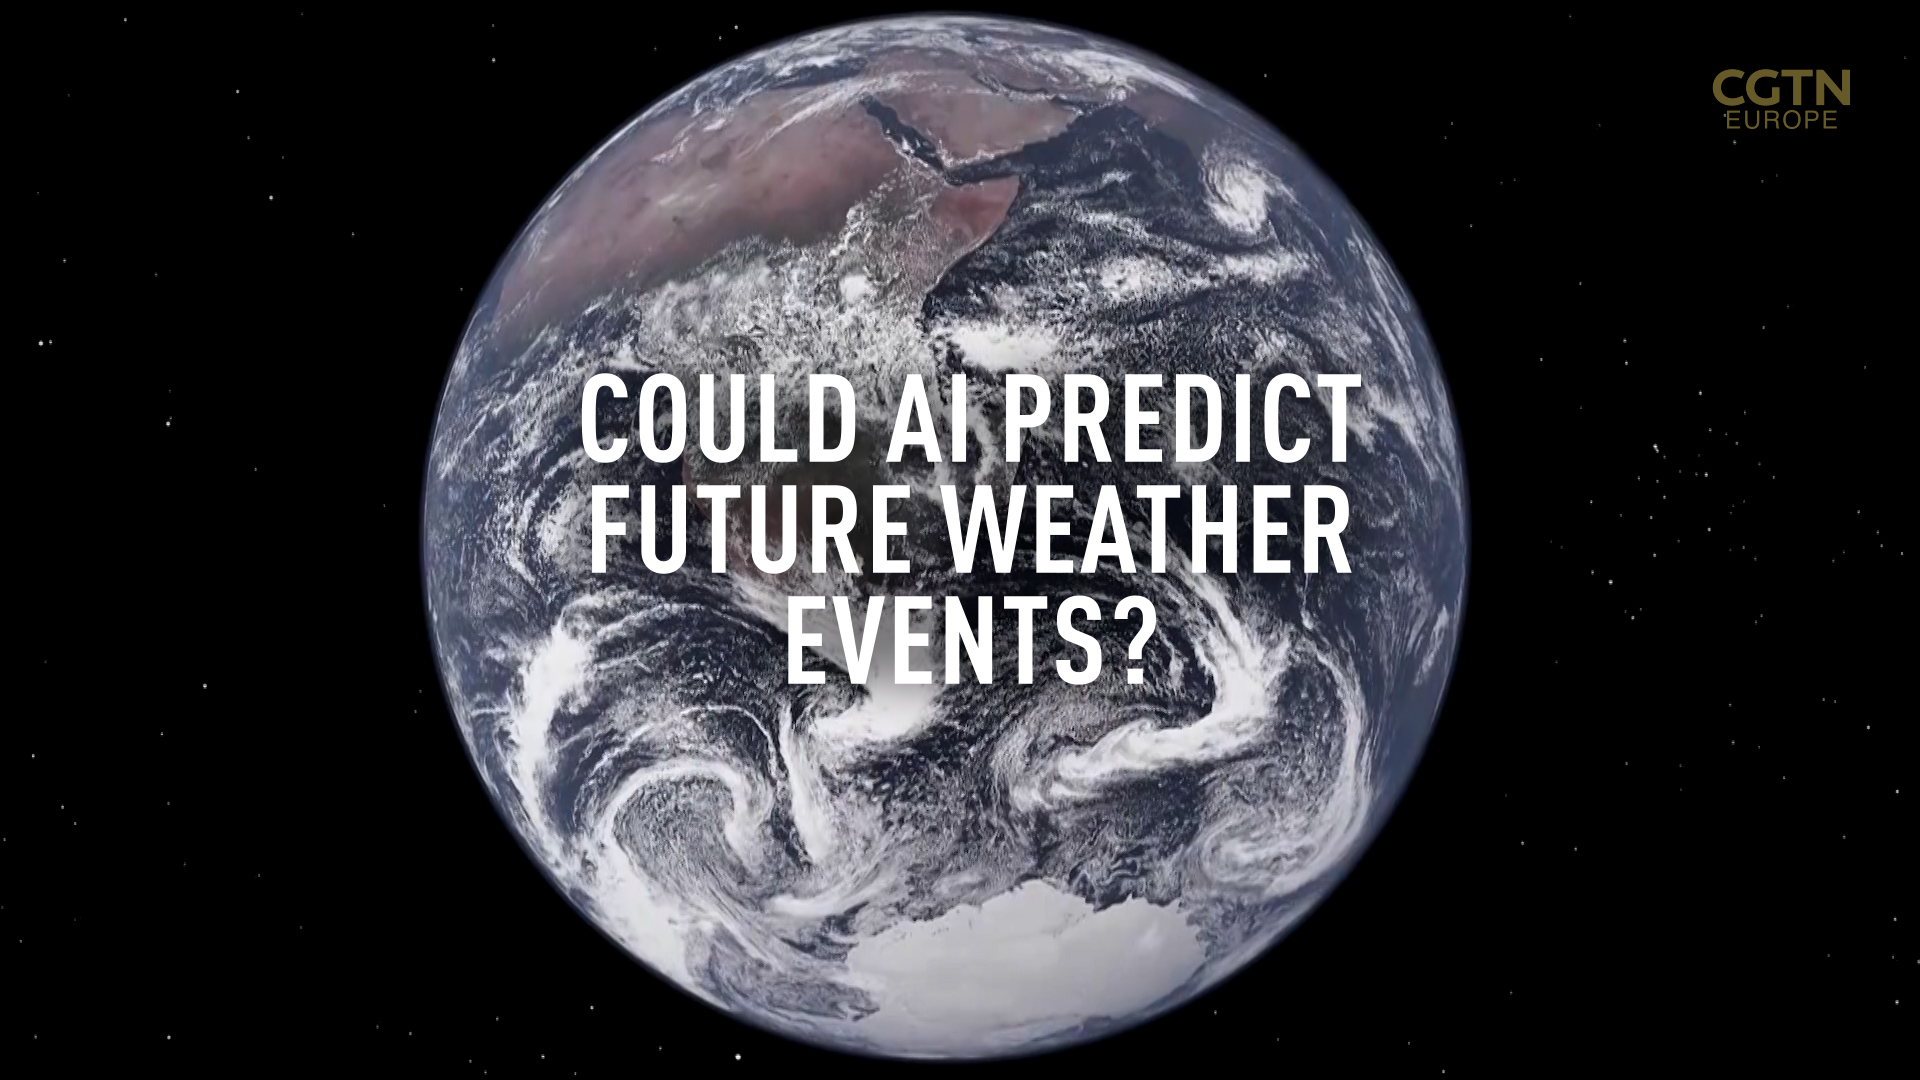 Artificial intelligence and supercomputing to predict extreme weather events